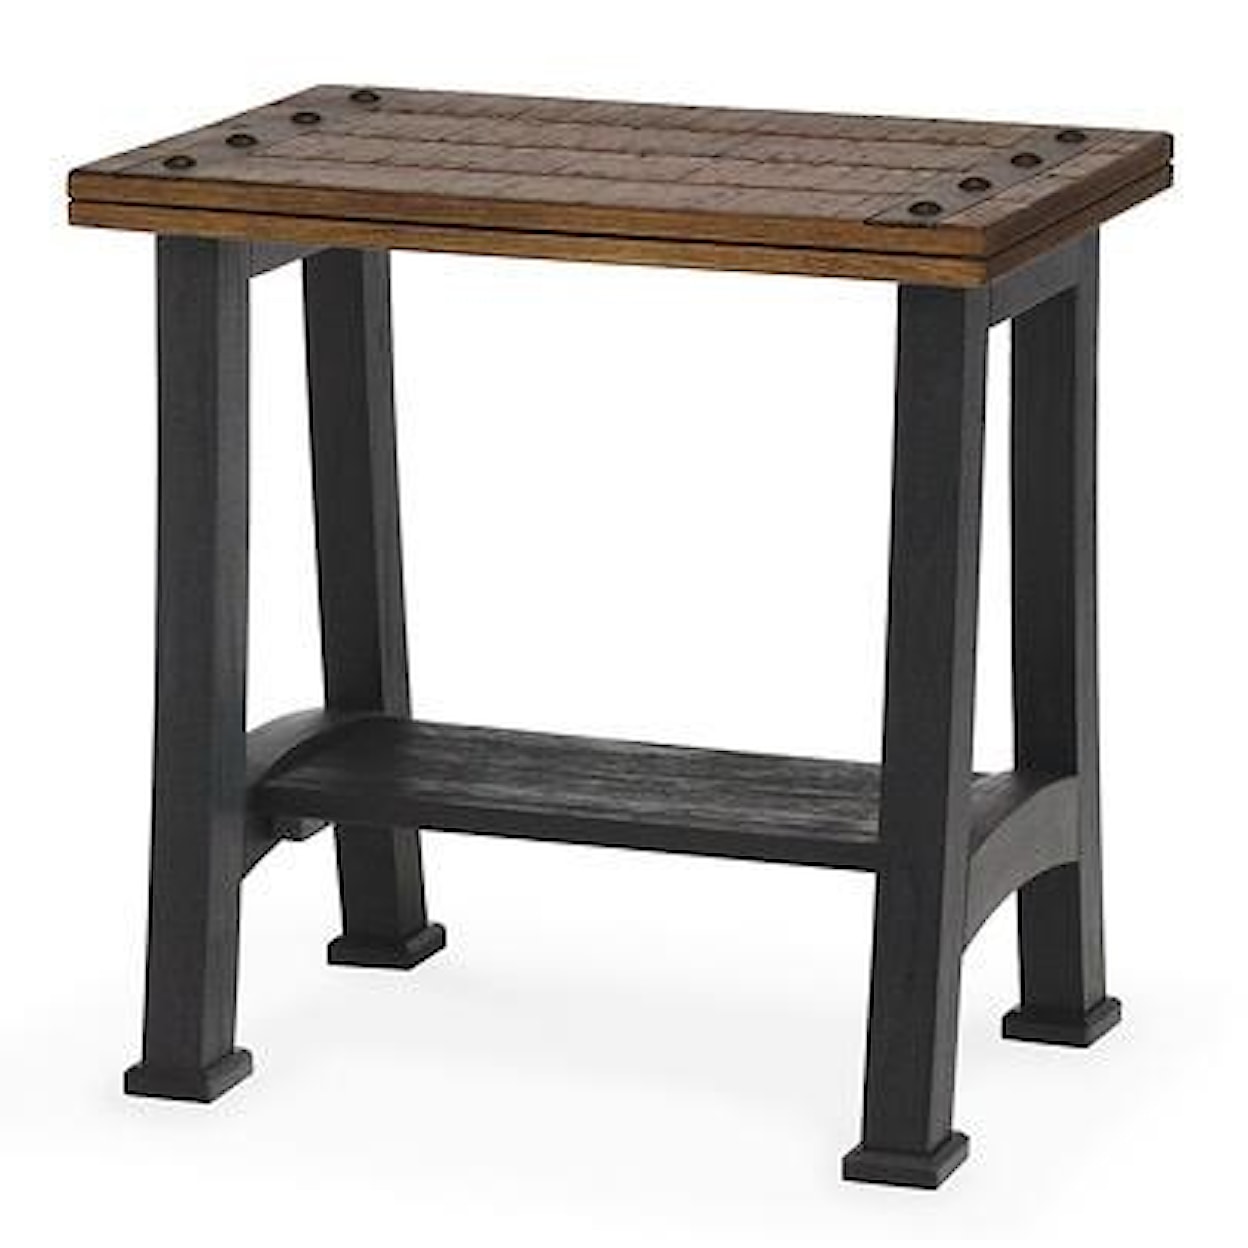 Peters Revington Sawmills Chairside Table